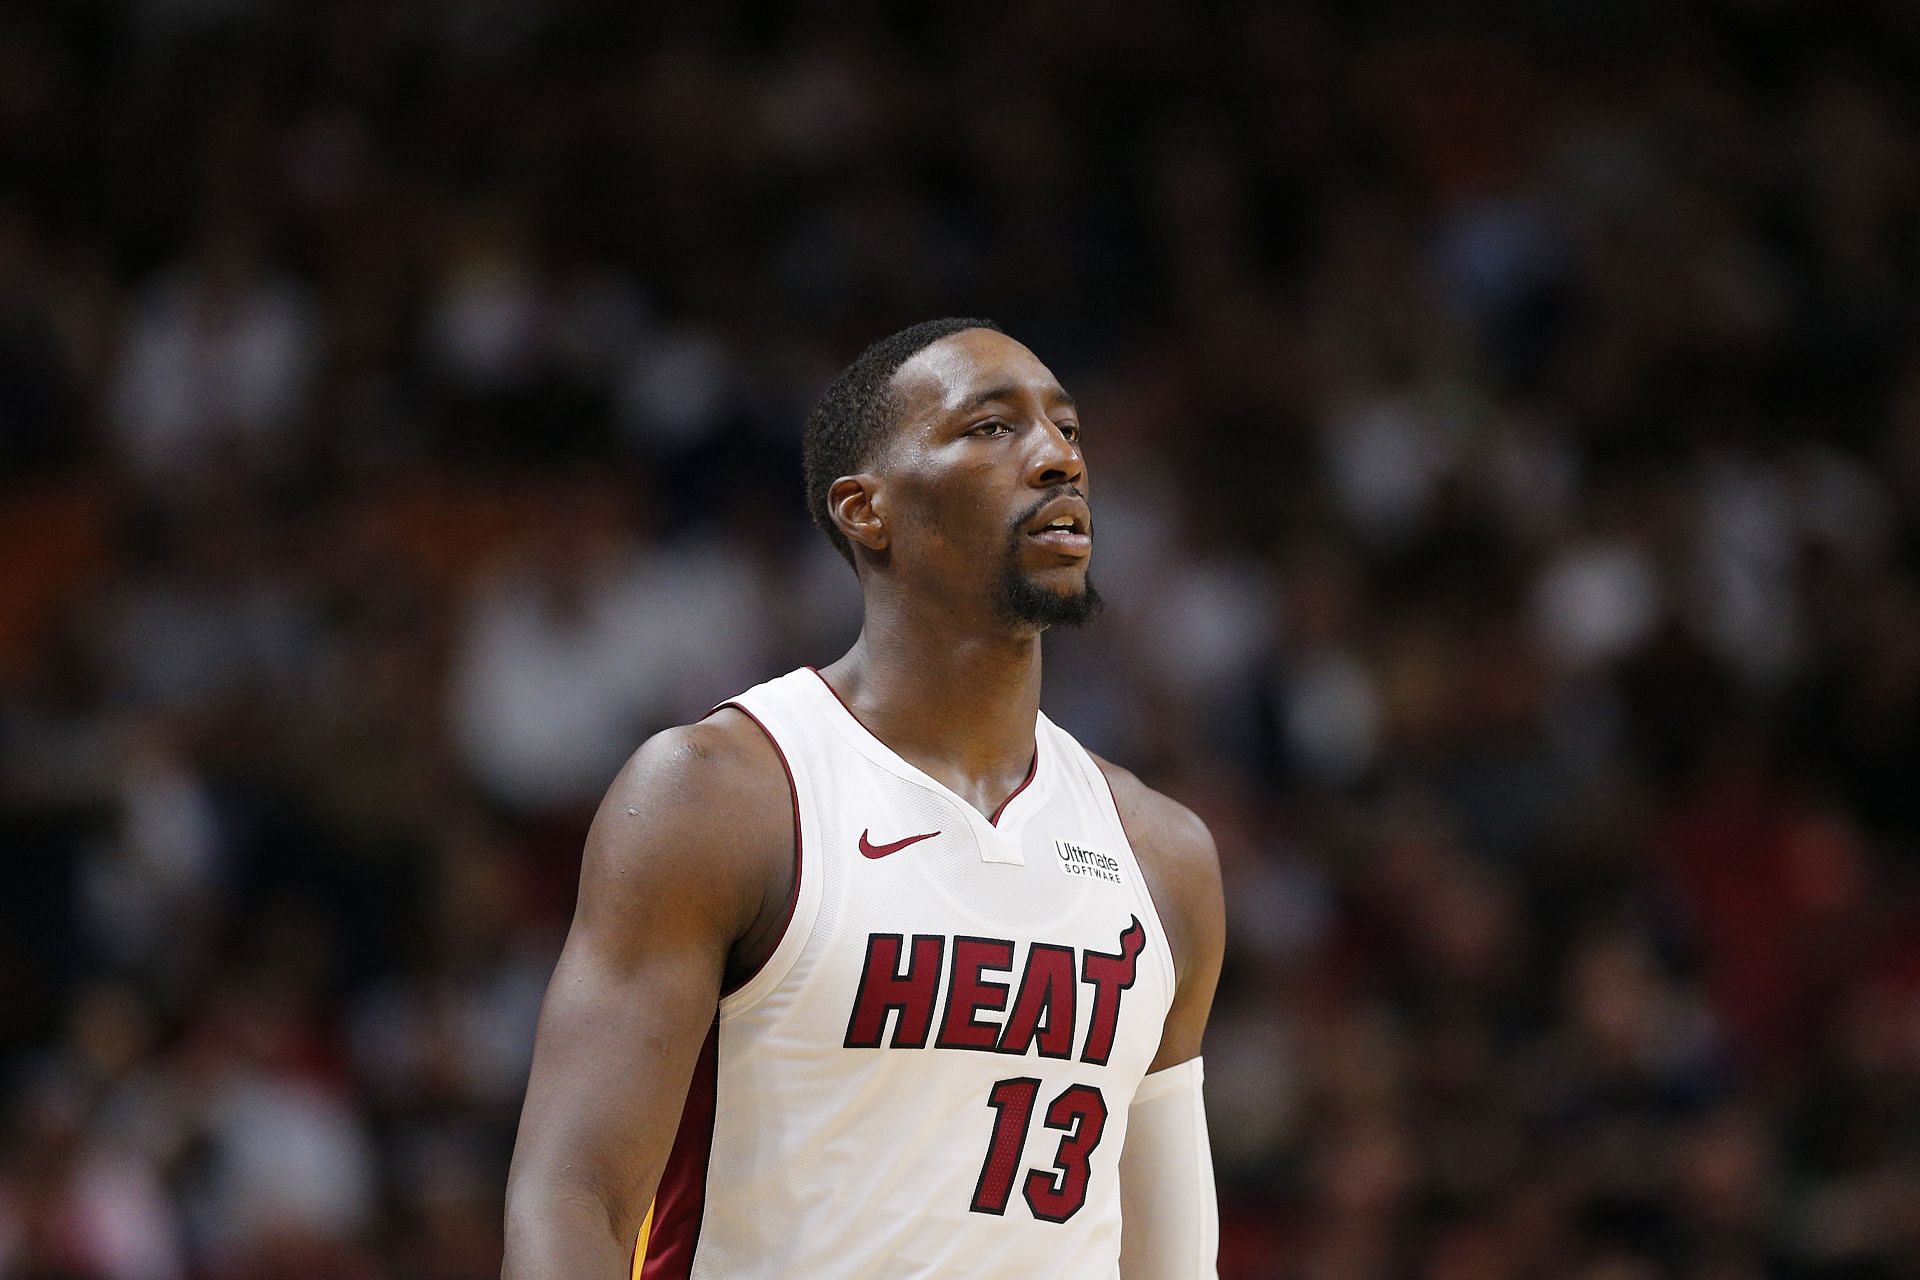 Bam Adebayo of the Miami Heat continues to be one of the top young centers in the NBA